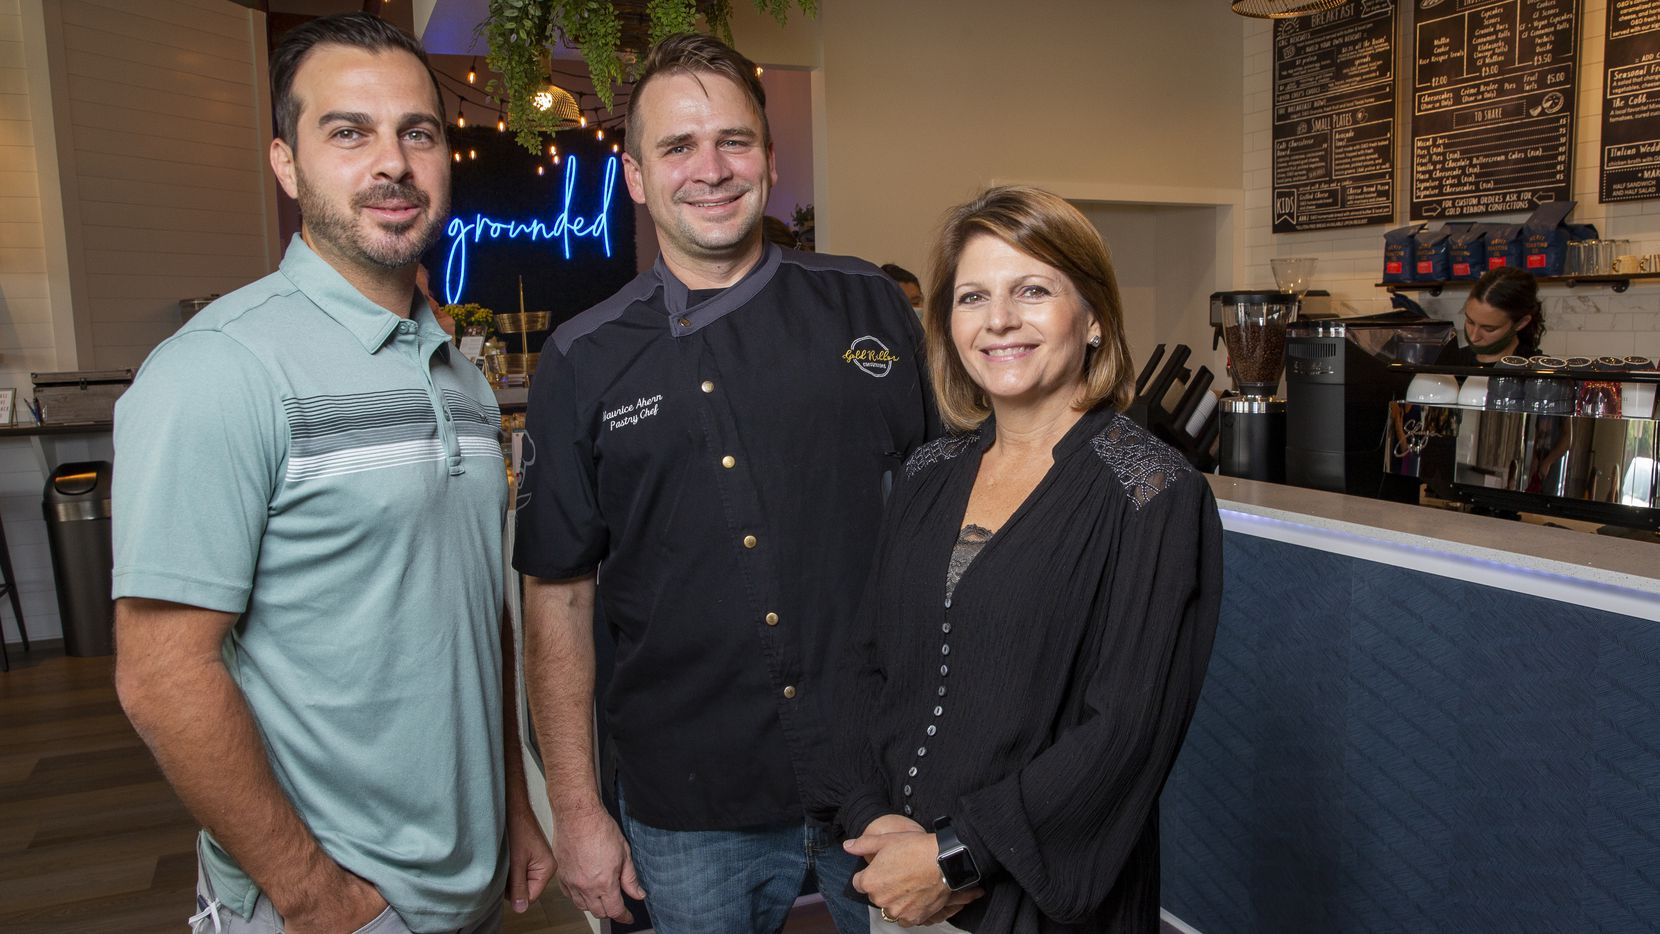 Grounds & Gold Coffee Co. co-owners Maurice Ahern with brother-in-law and mother-in-law, Jimmy and Jenifer Kinley pose for a photo in their cafe on Sept. 14, 2020 in Arlington. The coffee shop is an ode to Maurice's son Micah, who died from cancer four years ago.